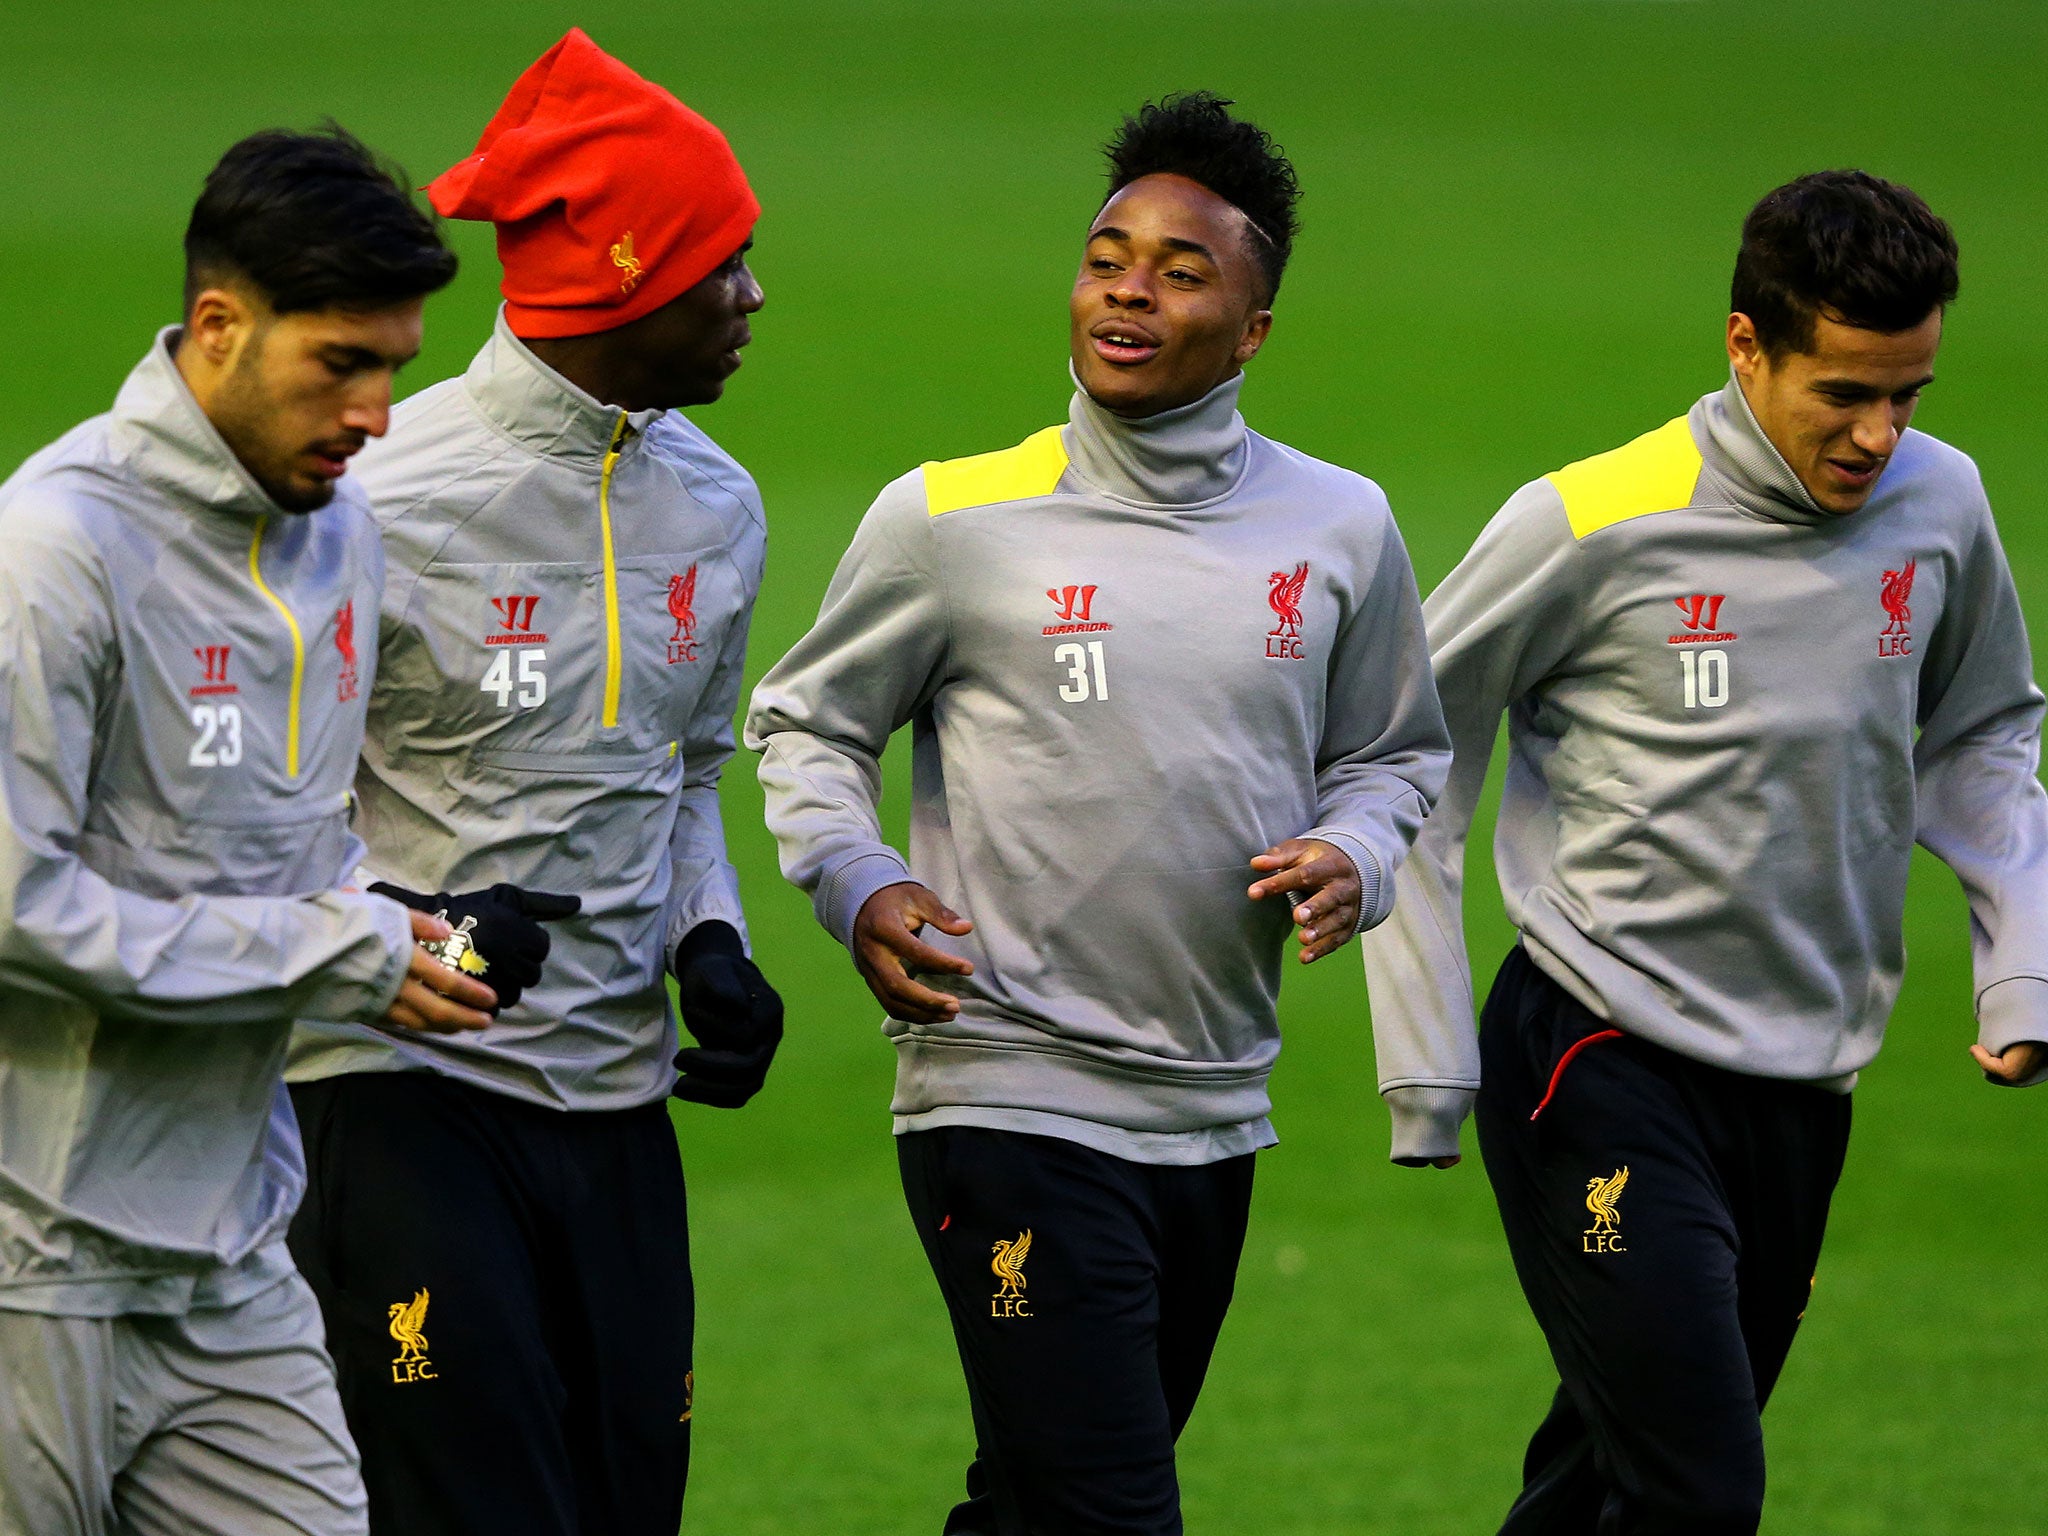 Emre Can, Mario Balotelli, Raheem Sterling and Philippe Coutinho of Liverpool warm up during a training session ahead of the match between Liverpool and Real Madrid.